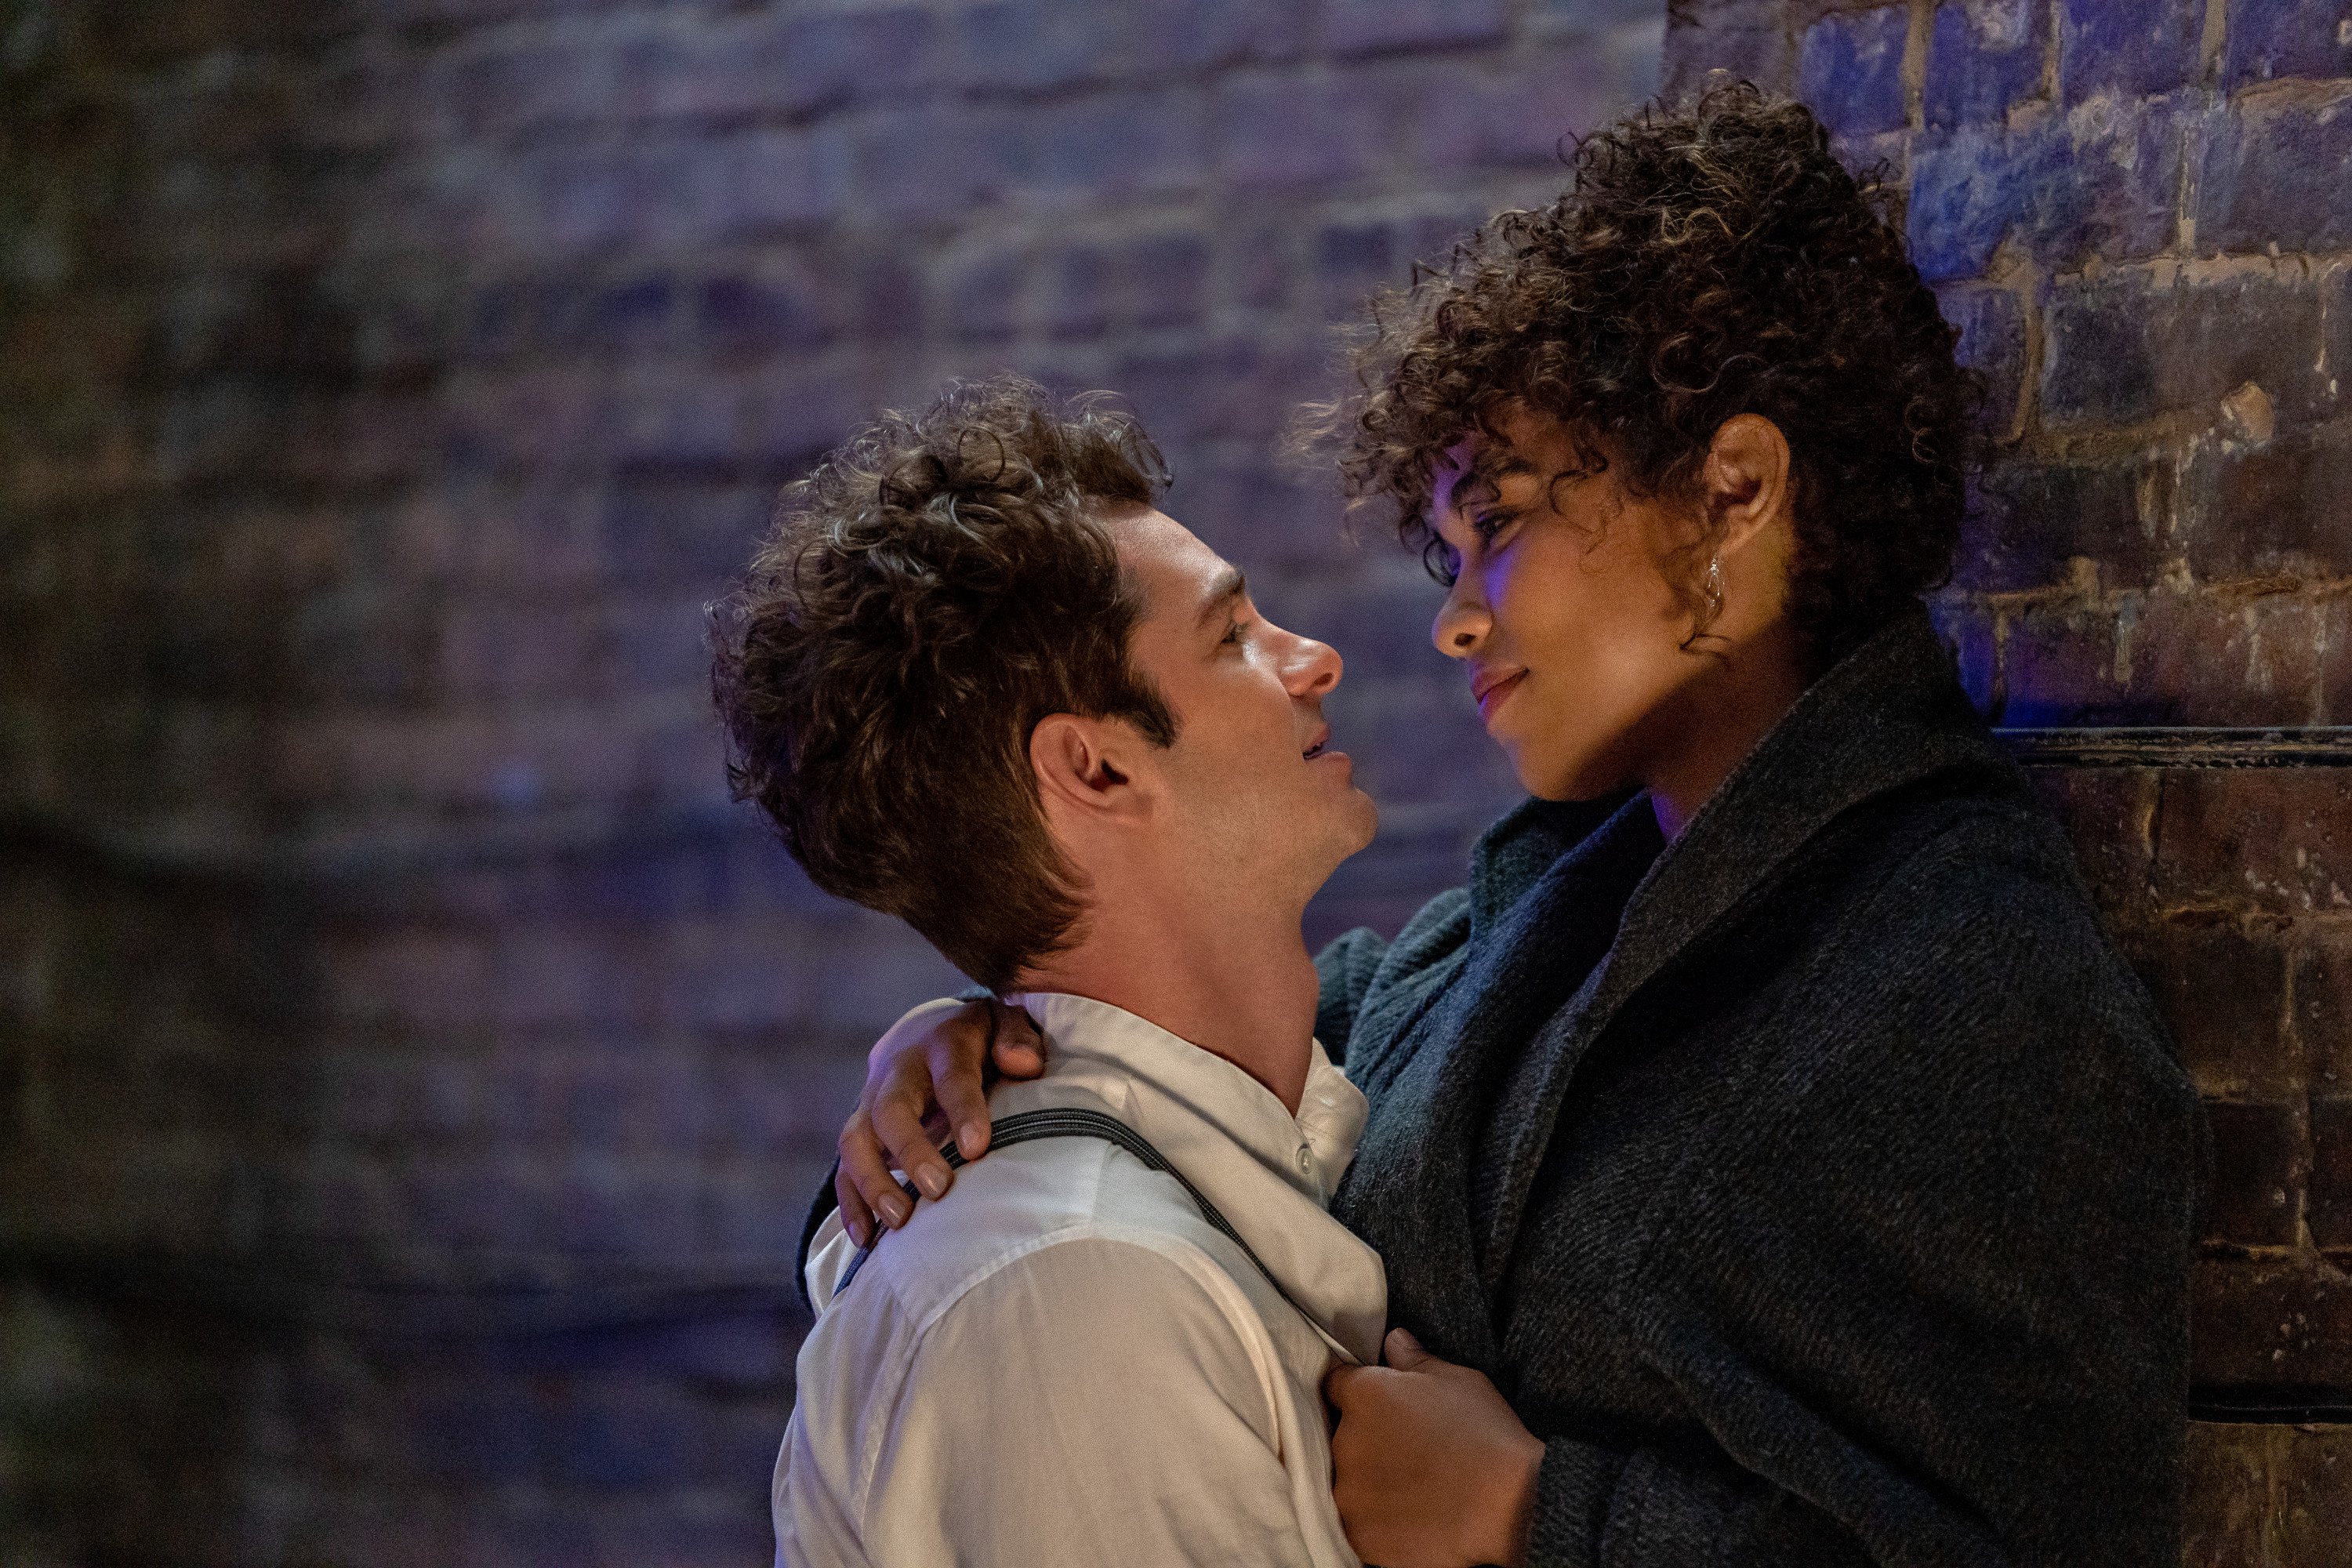 Andrew Garfield as Jonathan Larson, Alexandra Shipp as Susan in 'Tick, Tick...BOOM!' They embrace and look at each other lovingly while standing against a brick wall.